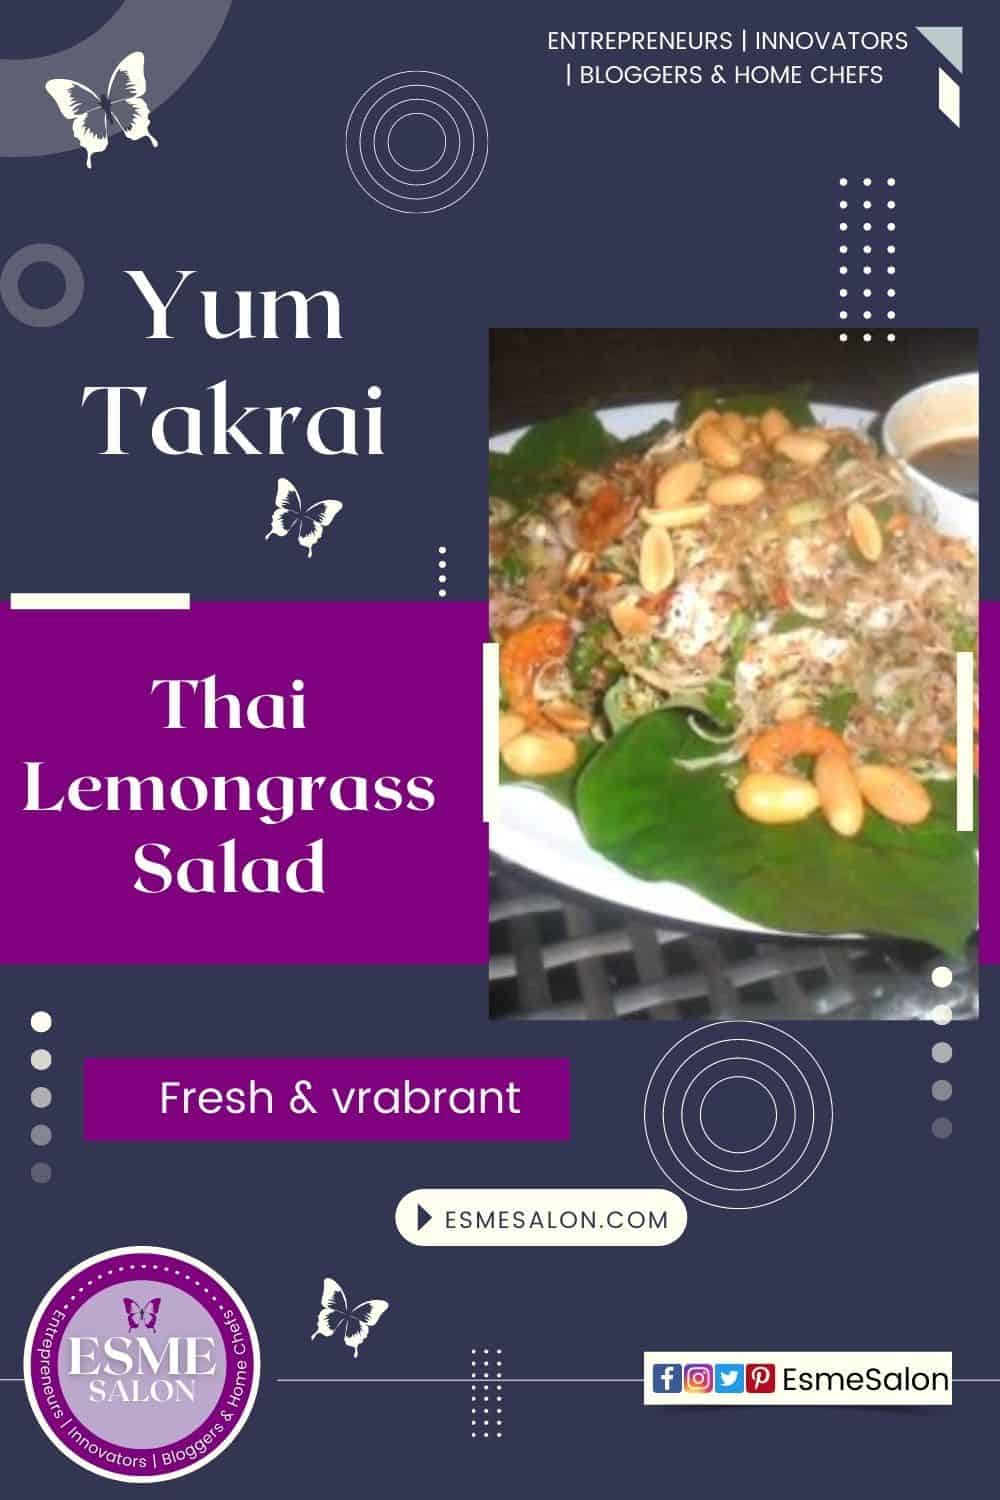 A Thai Lemongrass Salad can be enjoyed with only veggies or fish added